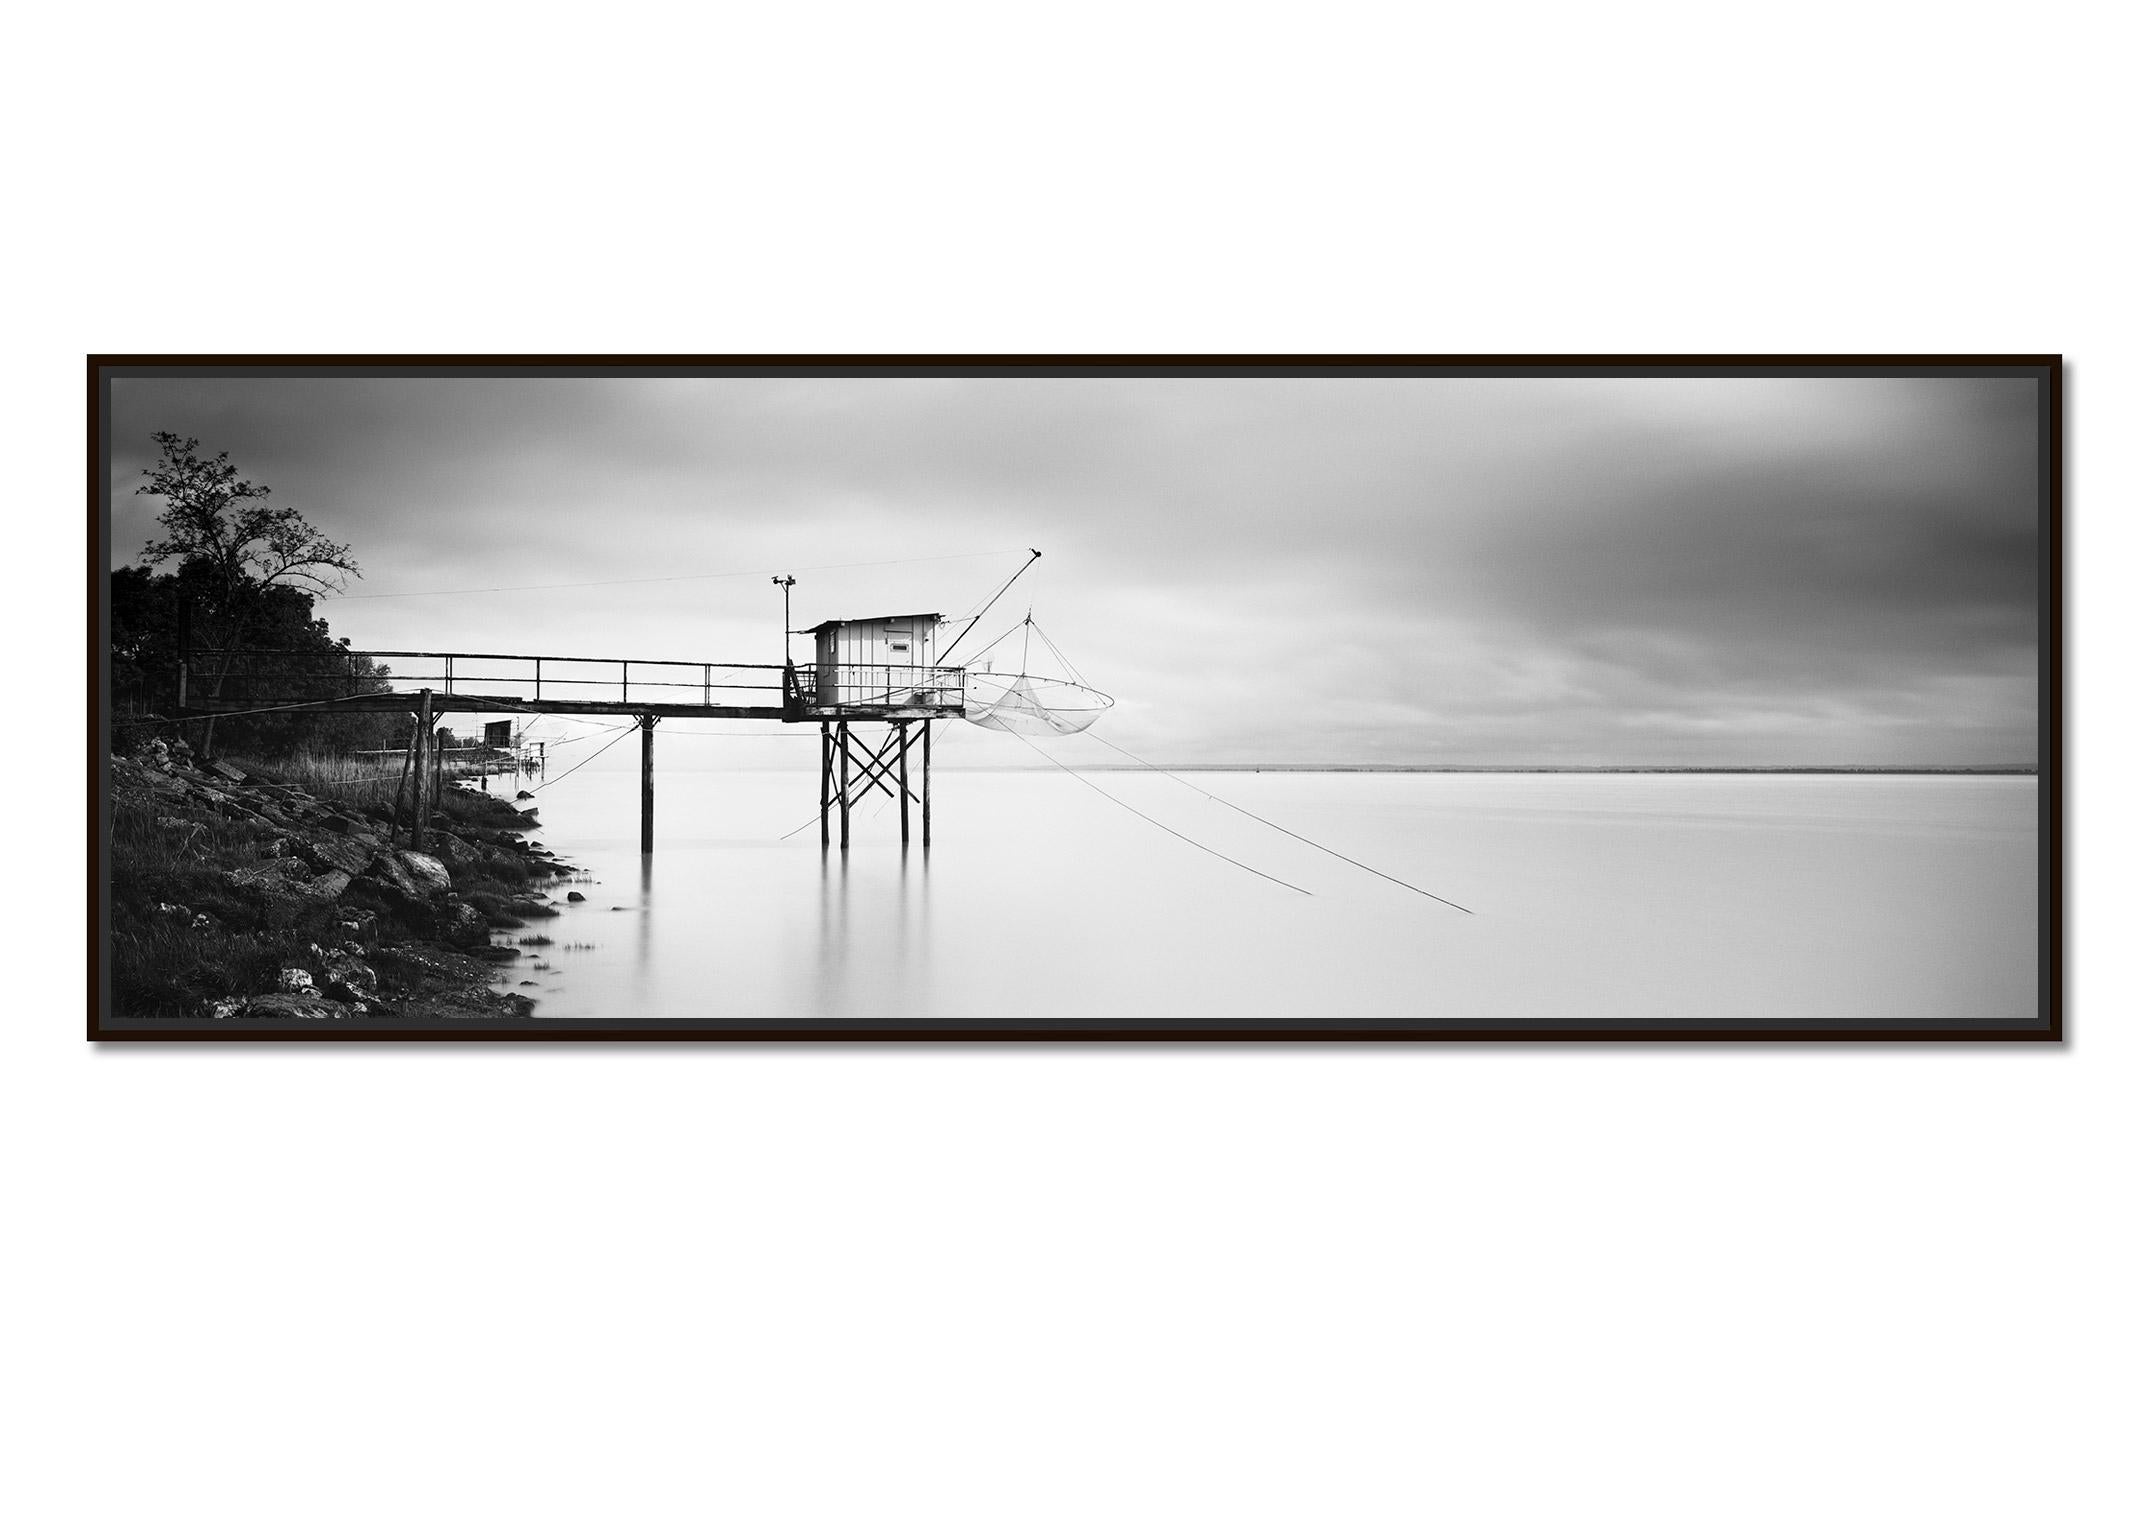 Stilt House Panorama, Fishing, Storm, black white fineart landscape photography - Photograph by Gerald Berghammer